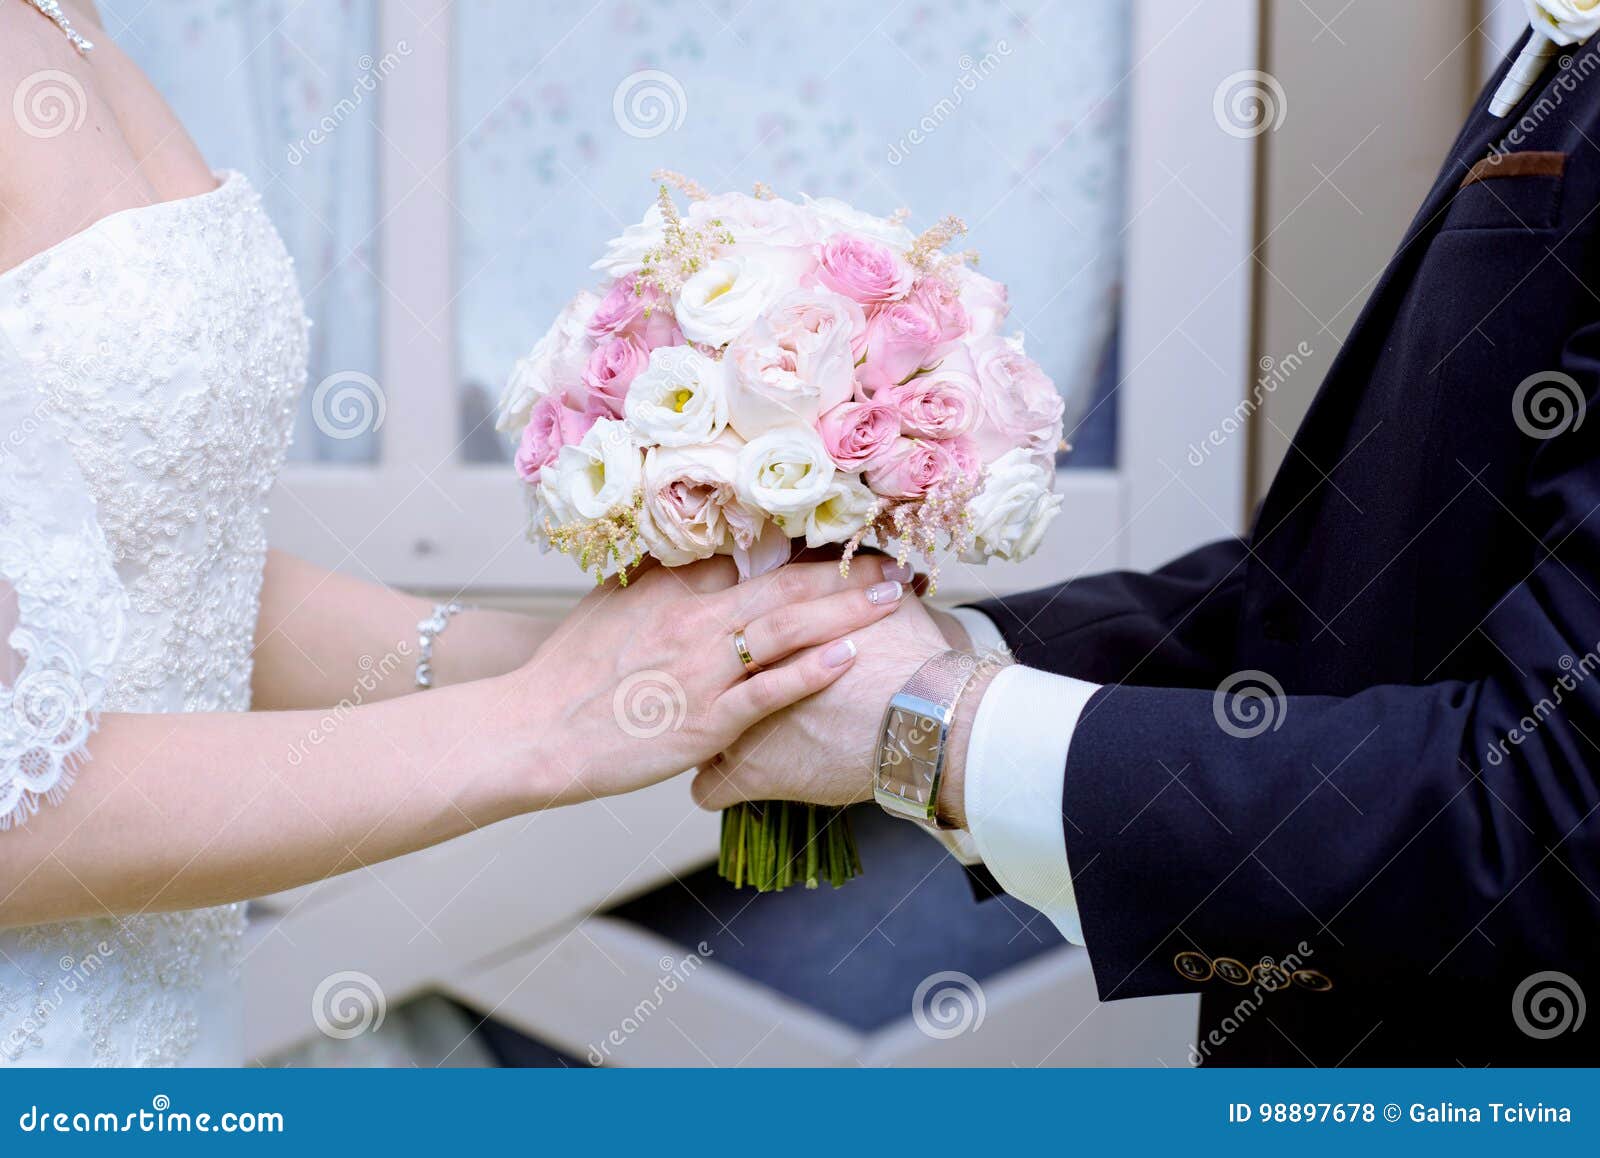 Wedding Couple with Bouquet Stock Photo - Image of happy, bouquet: 98897678